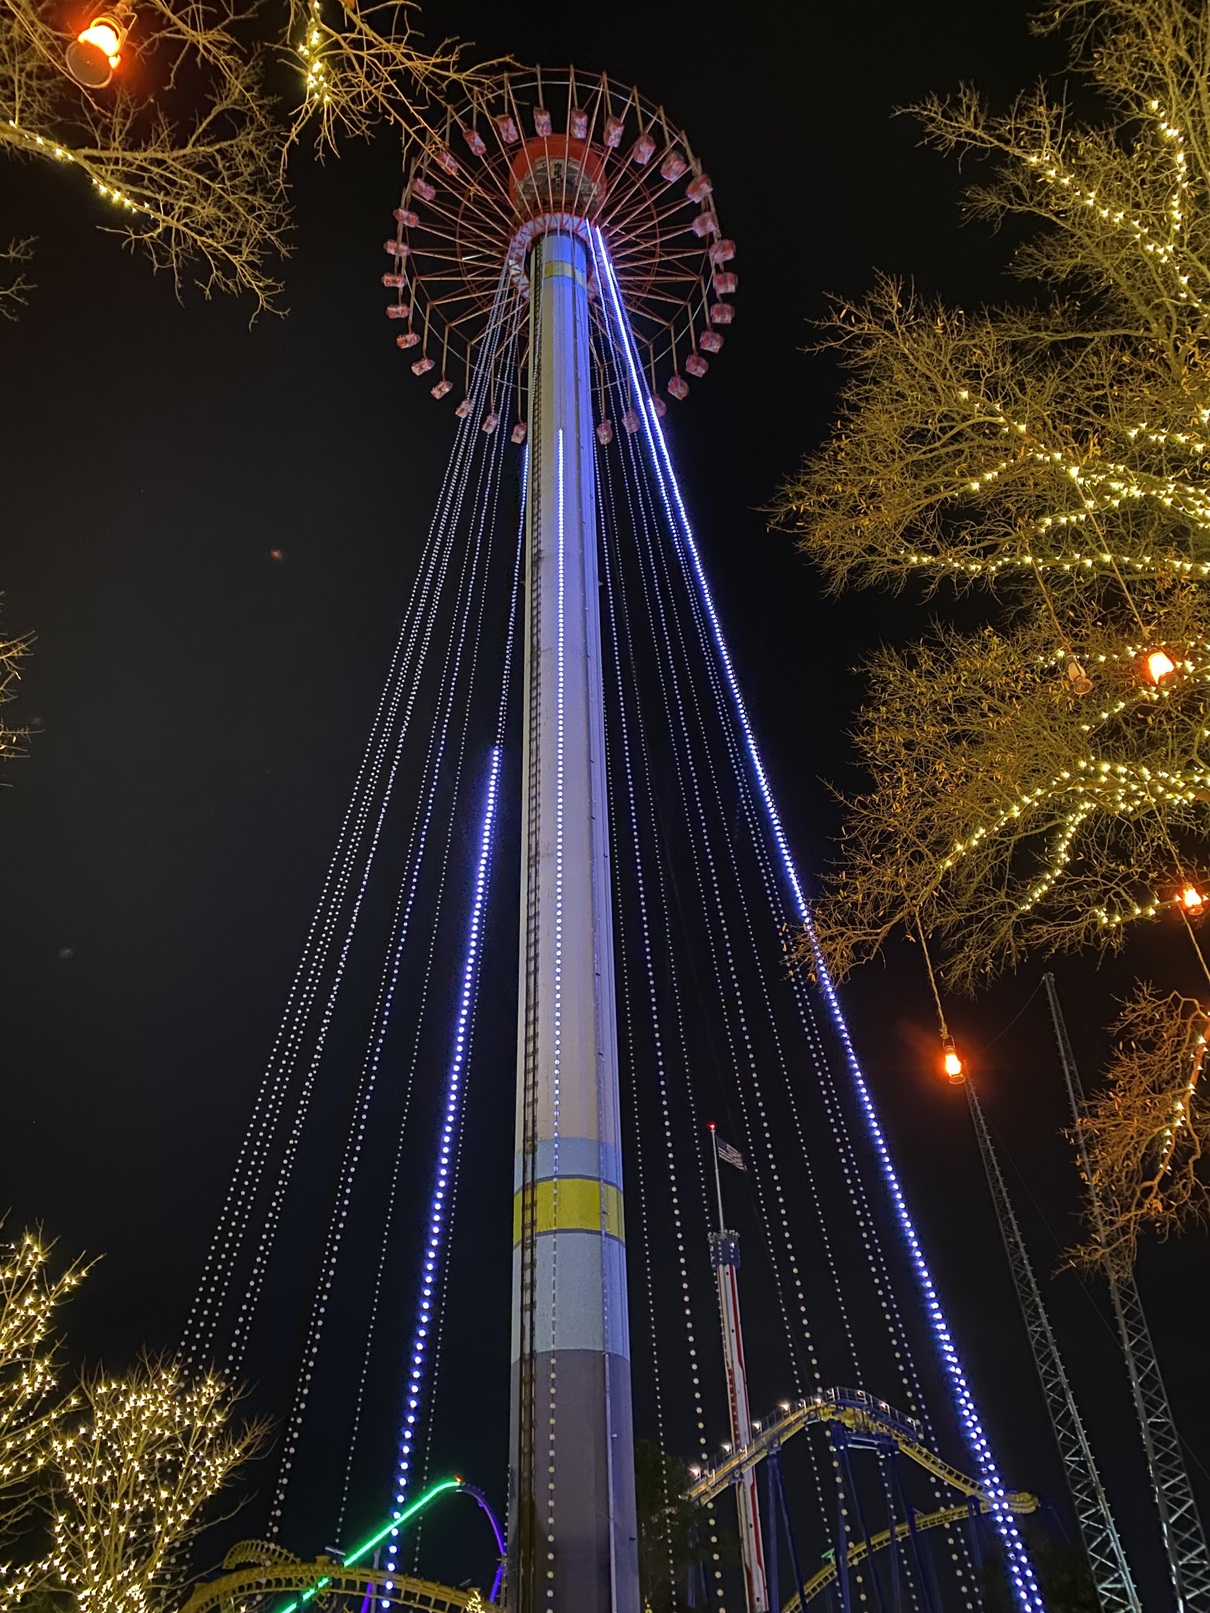 This is the Windseeker ride at Carowinds, illuminated at night for WinterFest.